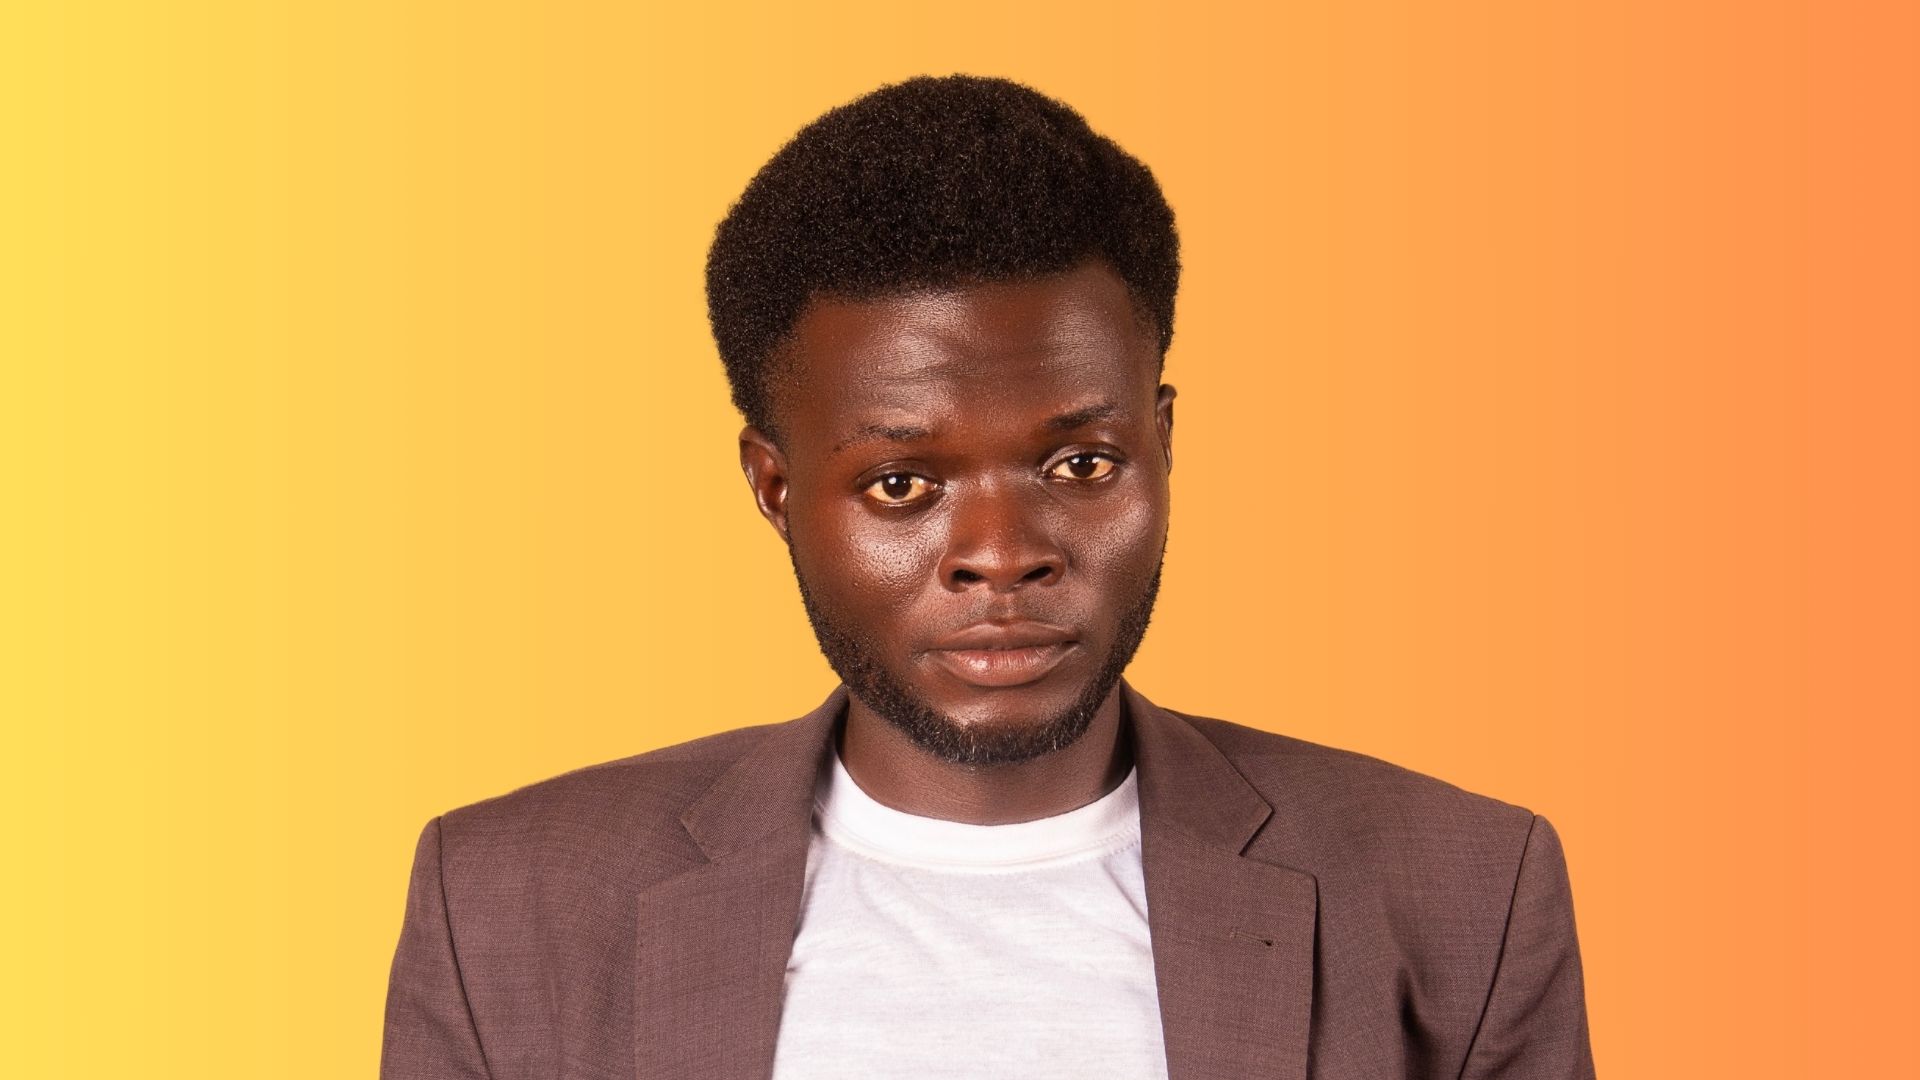 Elijah Ijogah, also known as Eryce Dennisson, was born on September 27, 1991, in Oyo State, Nigeria. His father introduced him to reggae legends like Lucky Dube and Majek Fashek, igniting his passion for music.